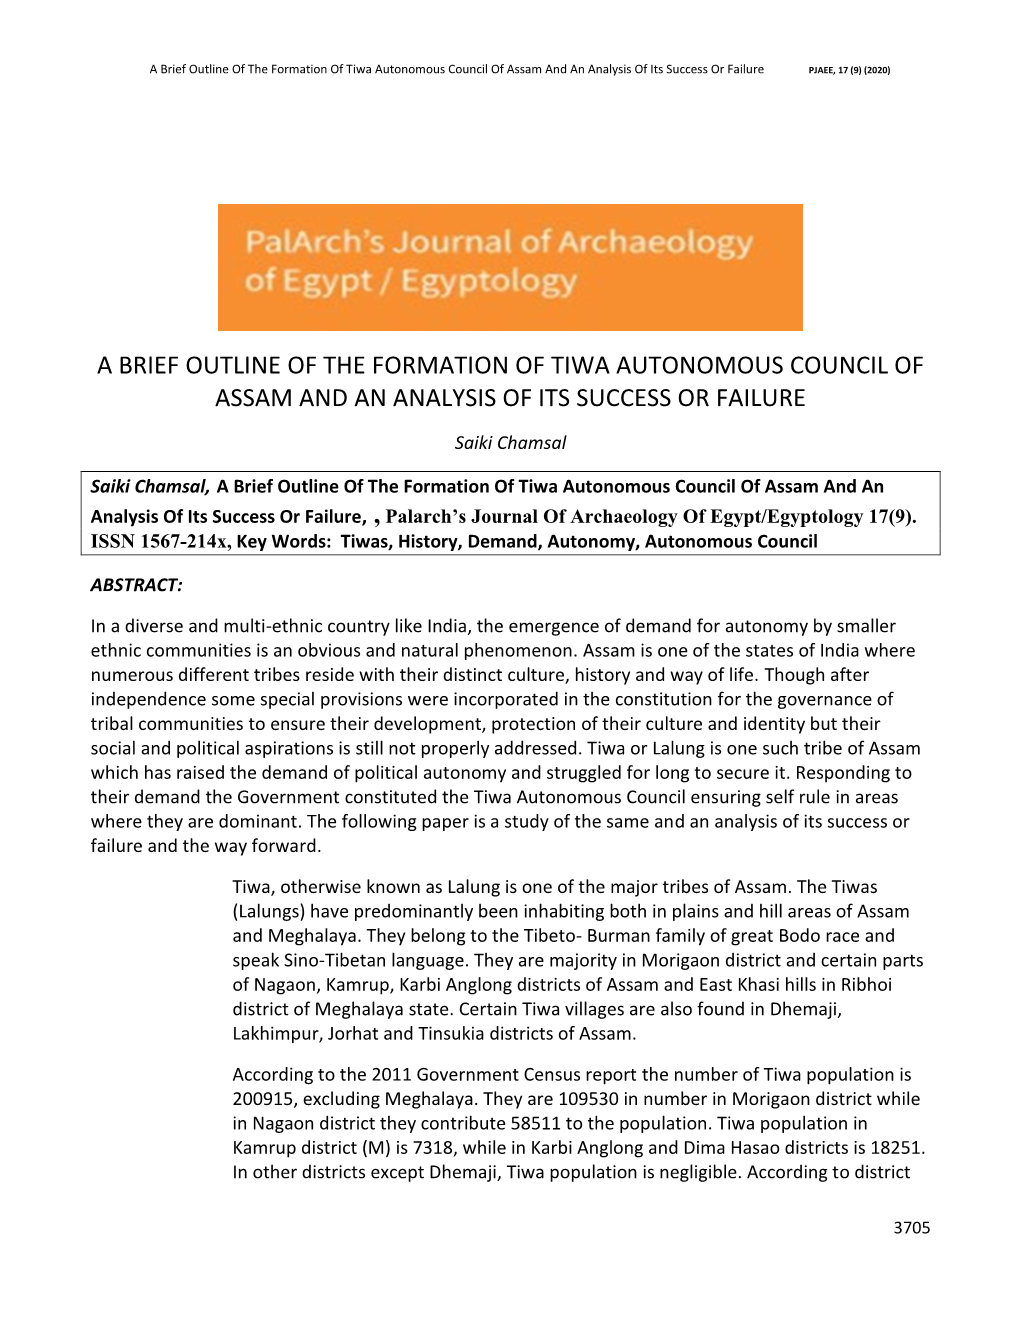 A Brief Outline of the Formation of Tiwa Autonomous Council of Assam and an Analysis of Its Success Or Failure PJAEE, 17 (9) (2020)